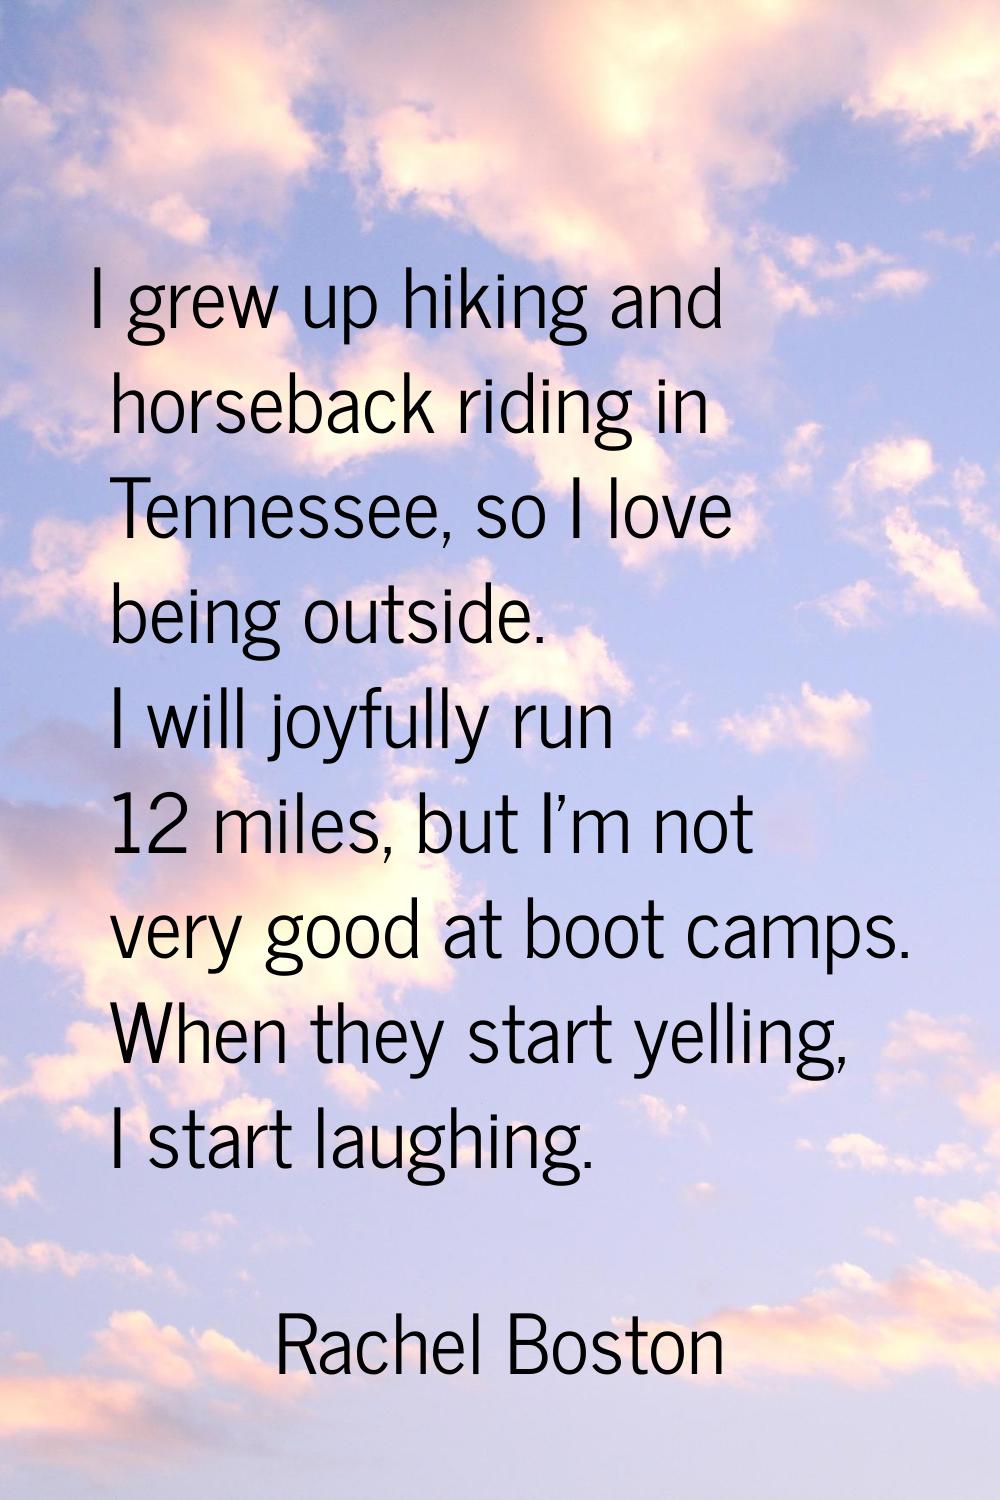 I grew up hiking and horseback riding in Tennessee, so I love being outside. I will joyfully run 12